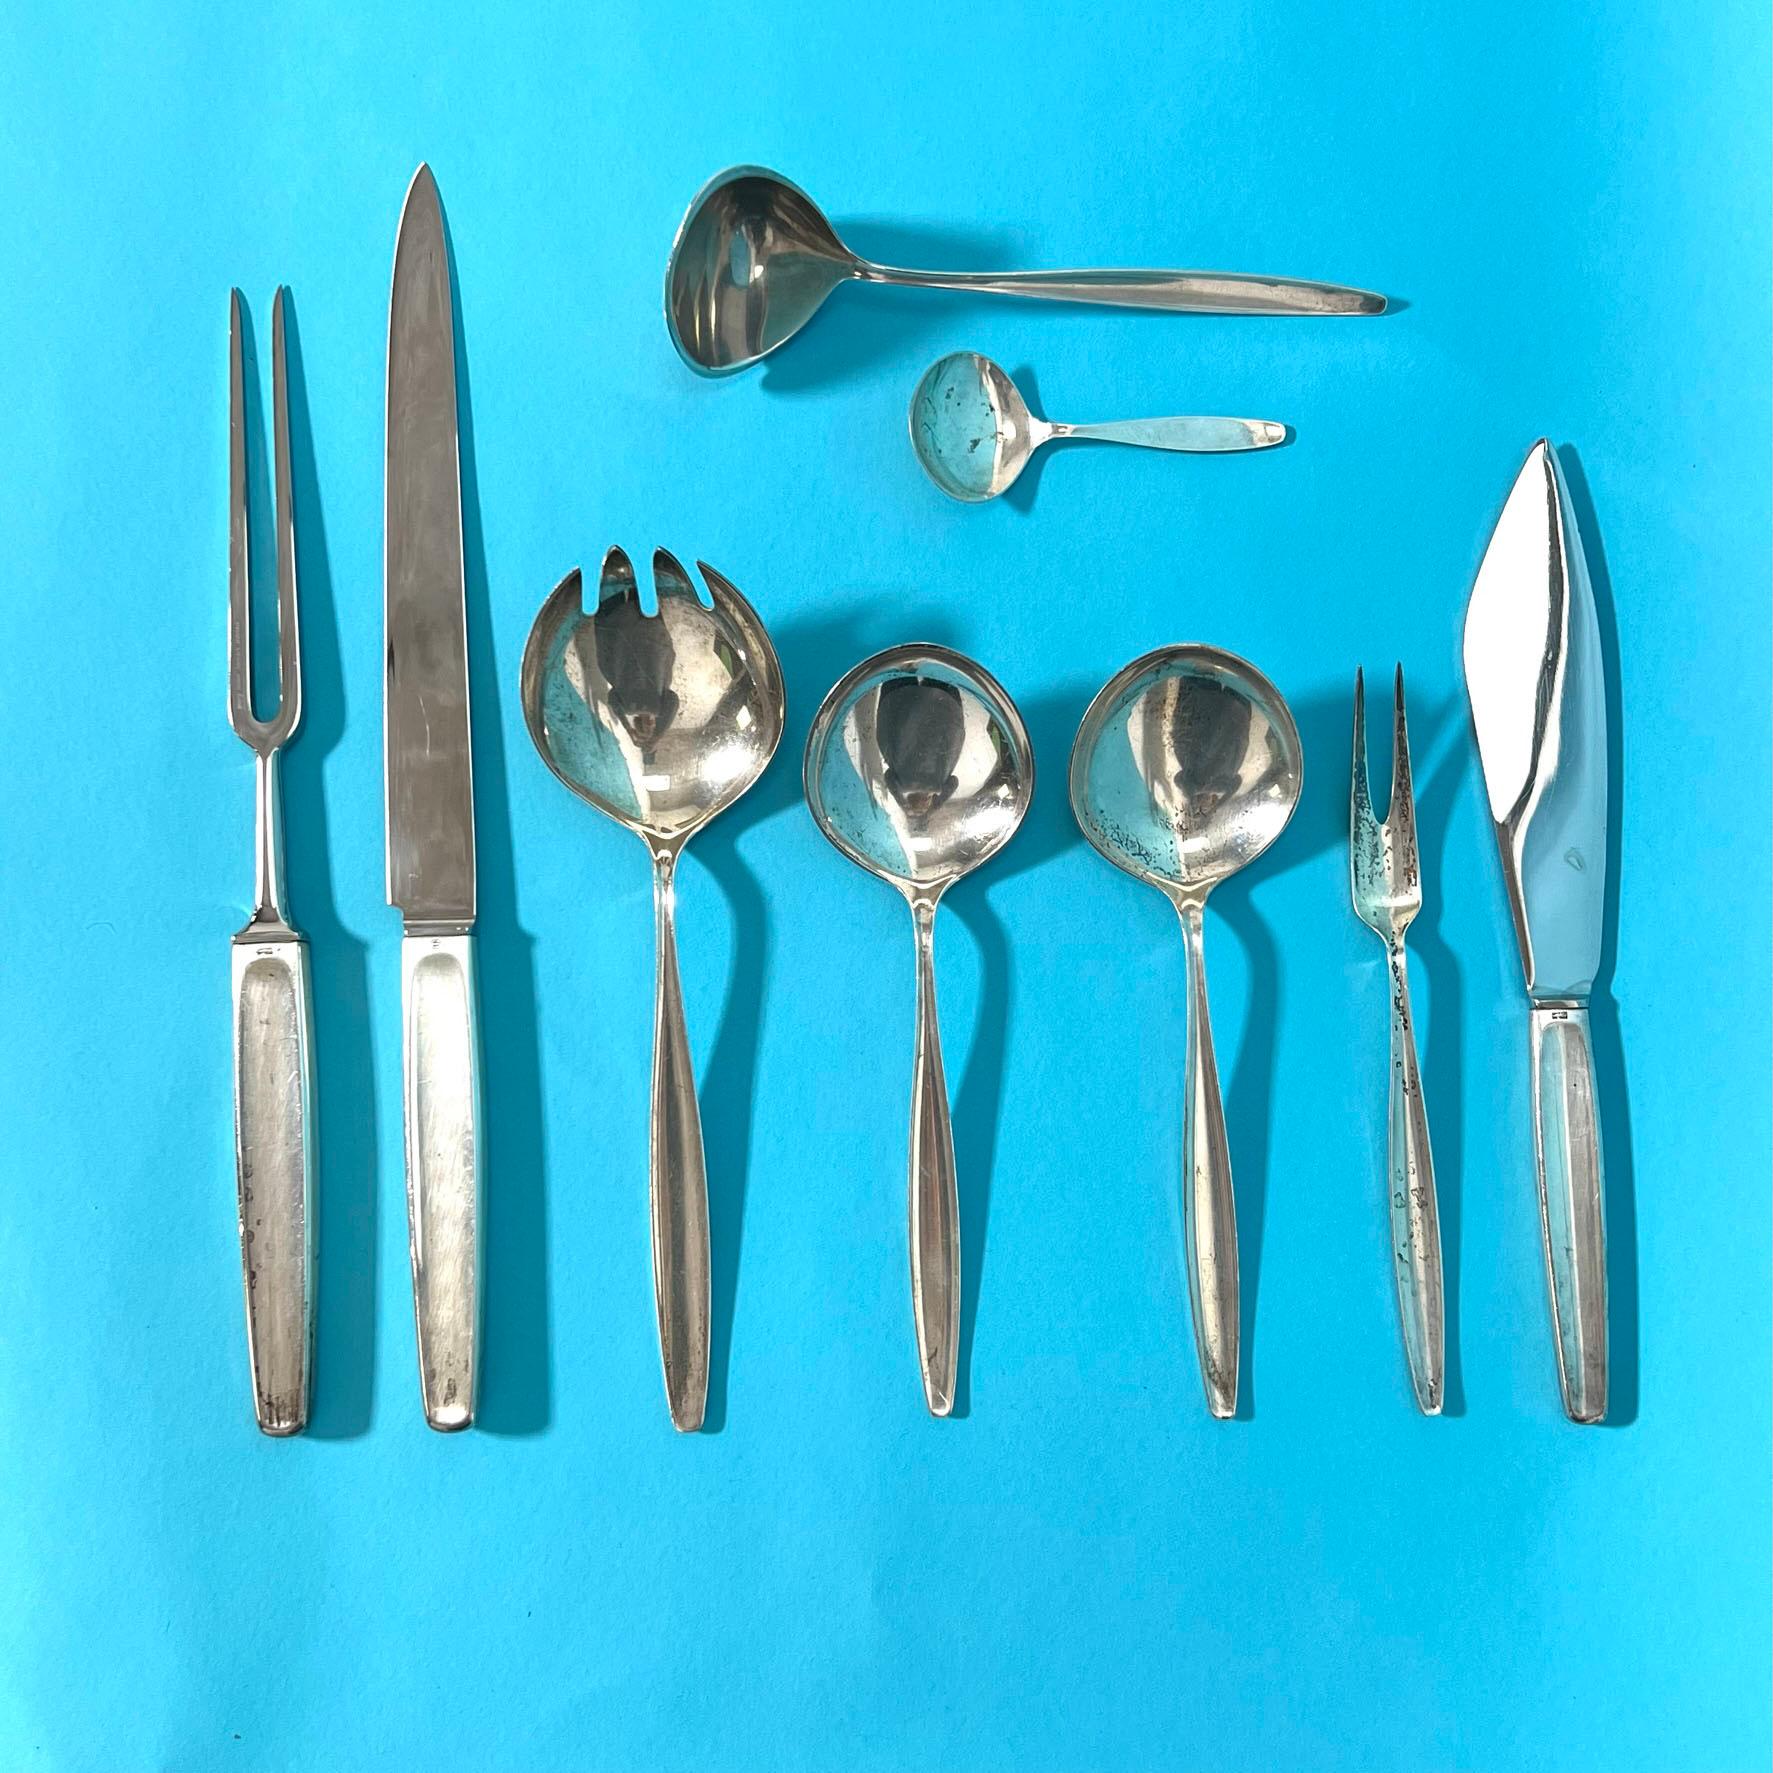 Modernist sterling silver flatware set in the Cypress pattern, designed by Tias Eckhoff for Georg Jensen, Denmark, circa early 1950s. We have a full service for 12: each six-piece place setting consists of a dinner knife, butter knife, dinner and